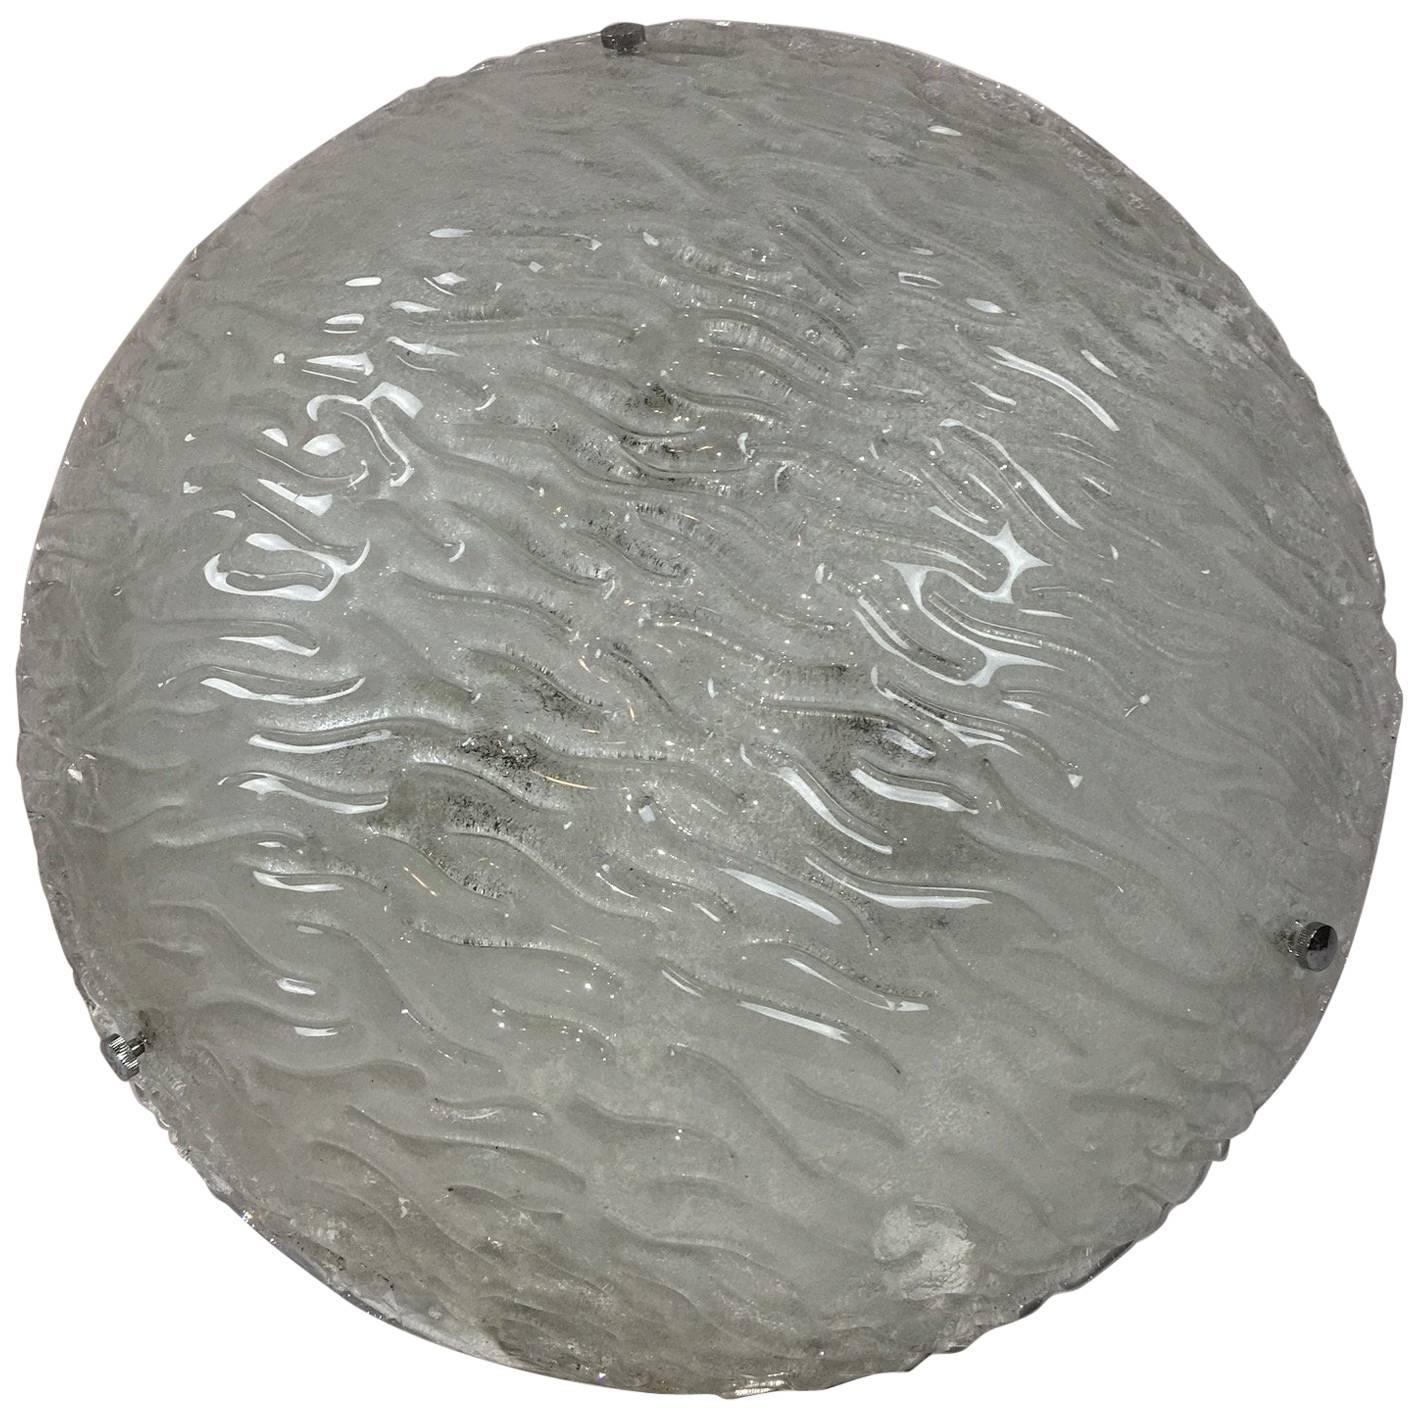 Huge Massive Textured Glass Flush Mount with Chrome Hardware For Sale